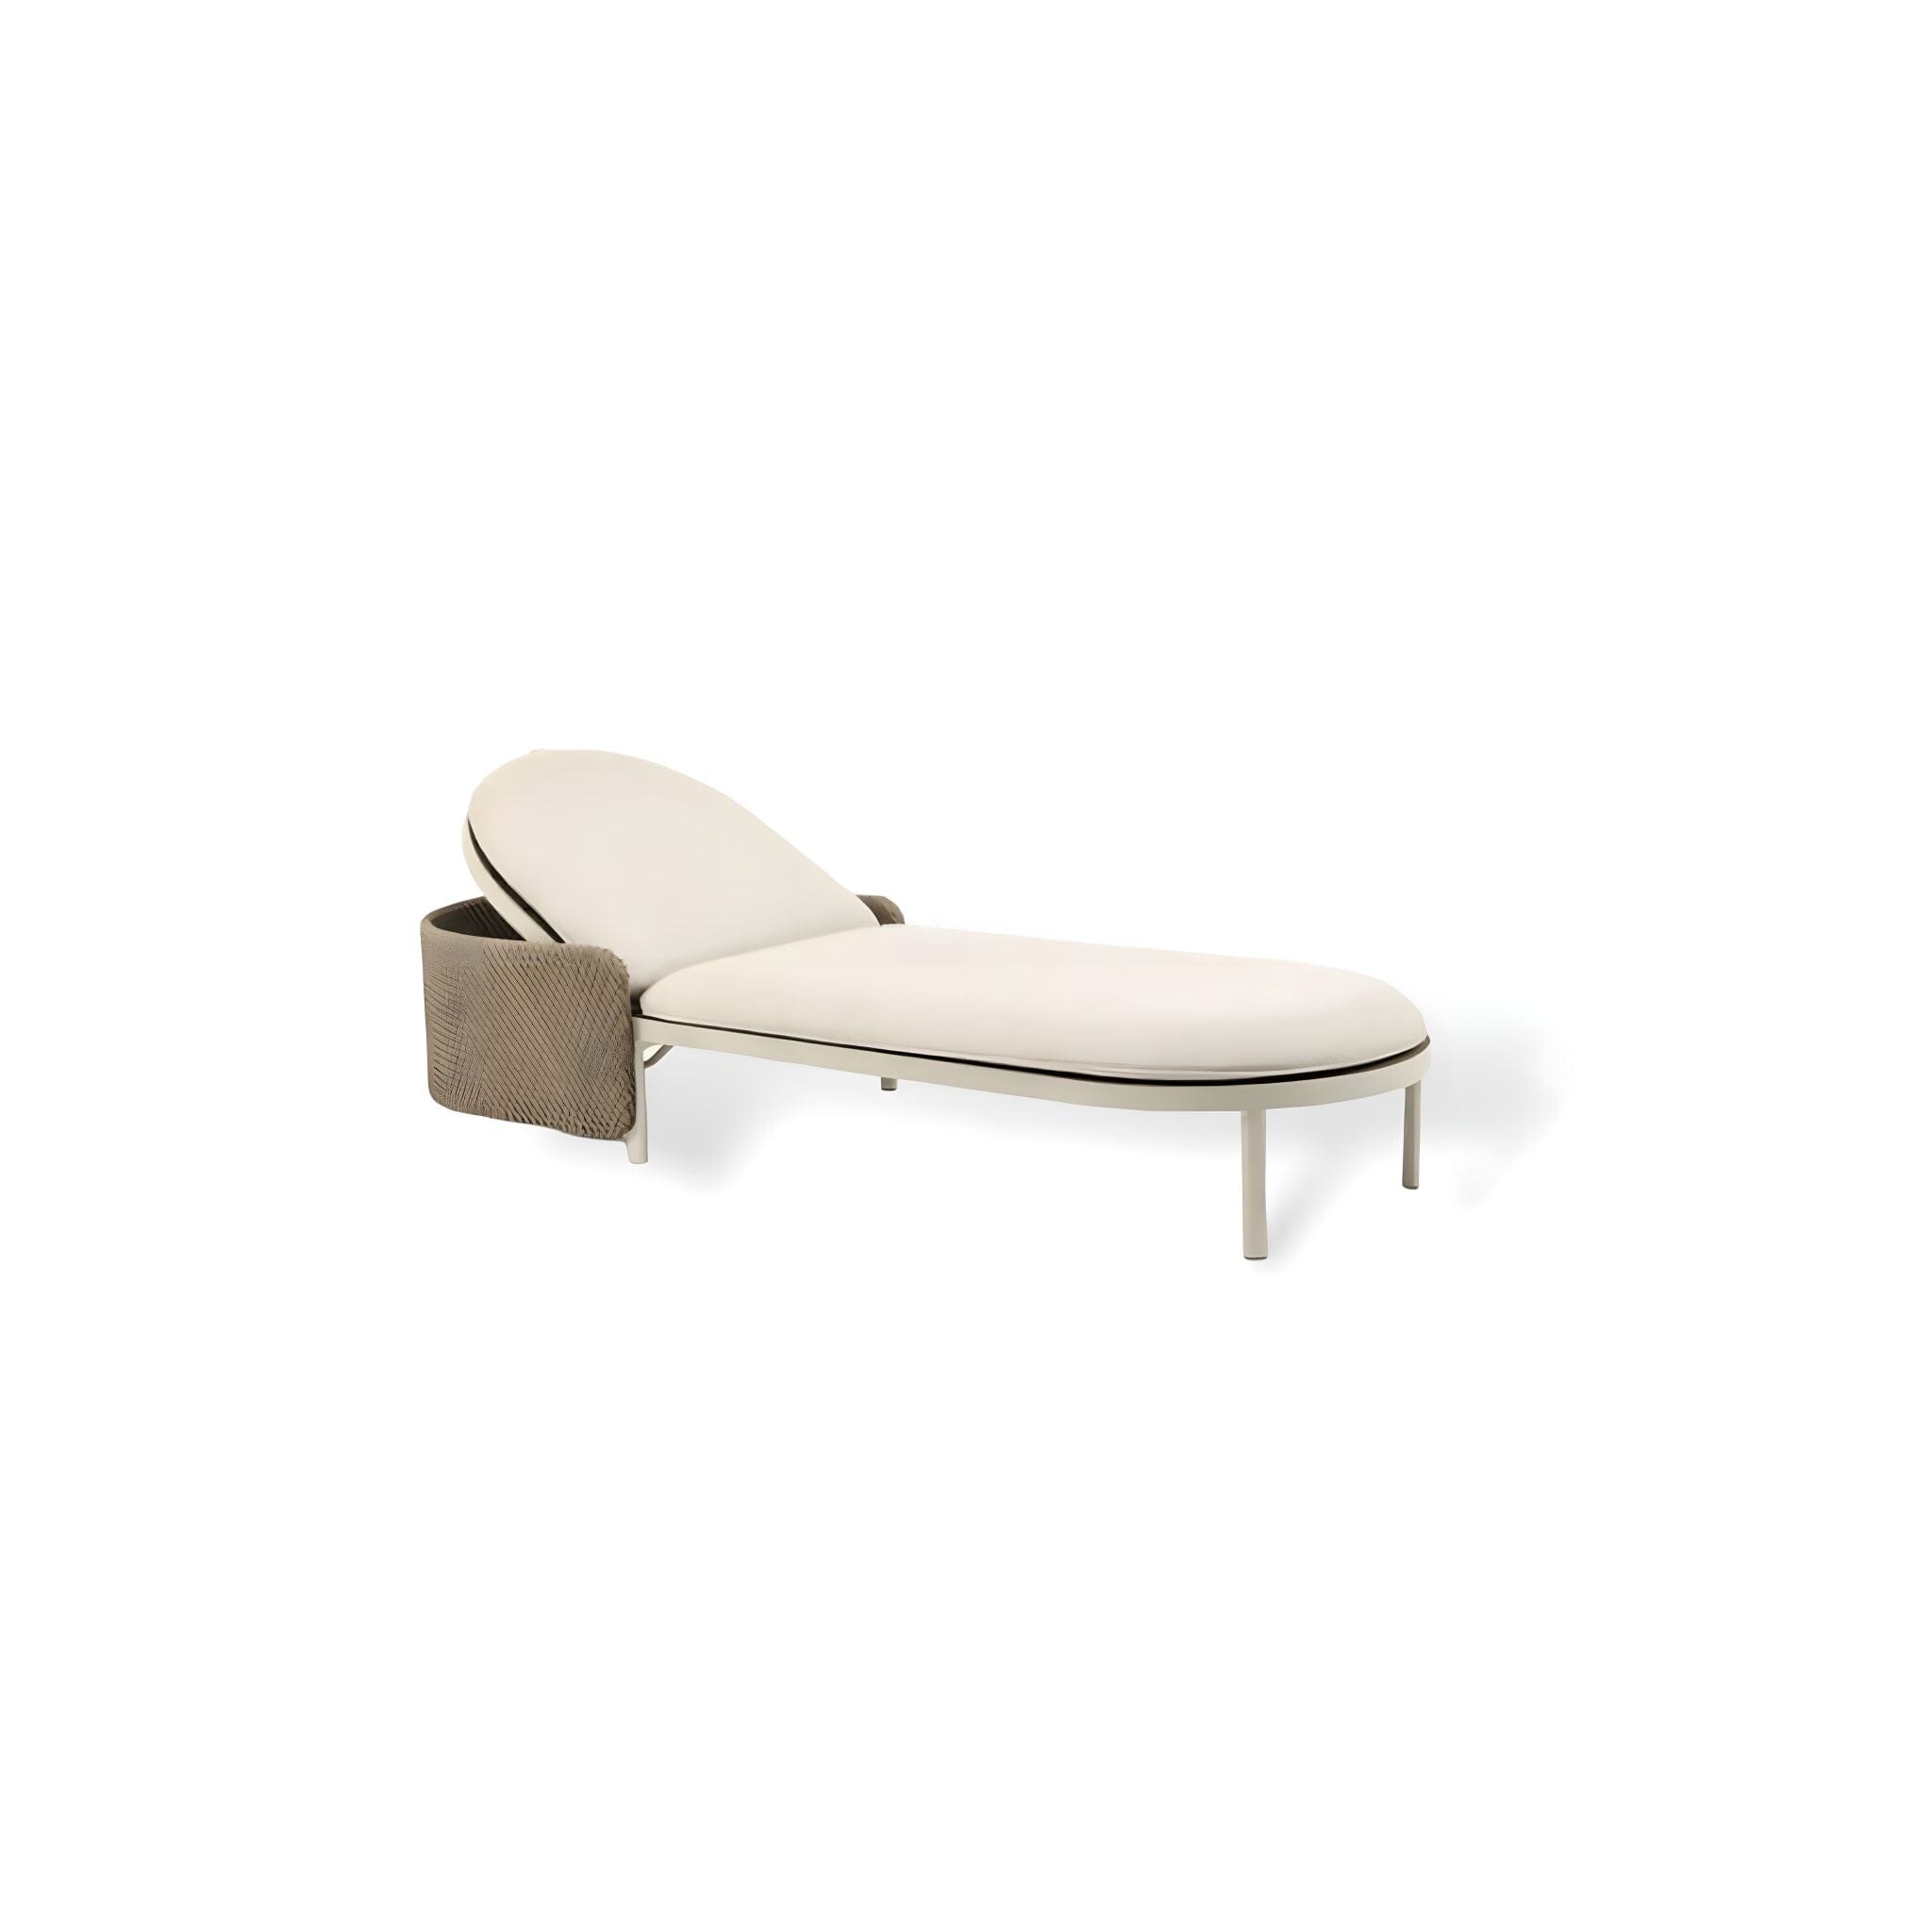 Terrasse Outdoor Collection Outdoor Furniture Sun Bed 